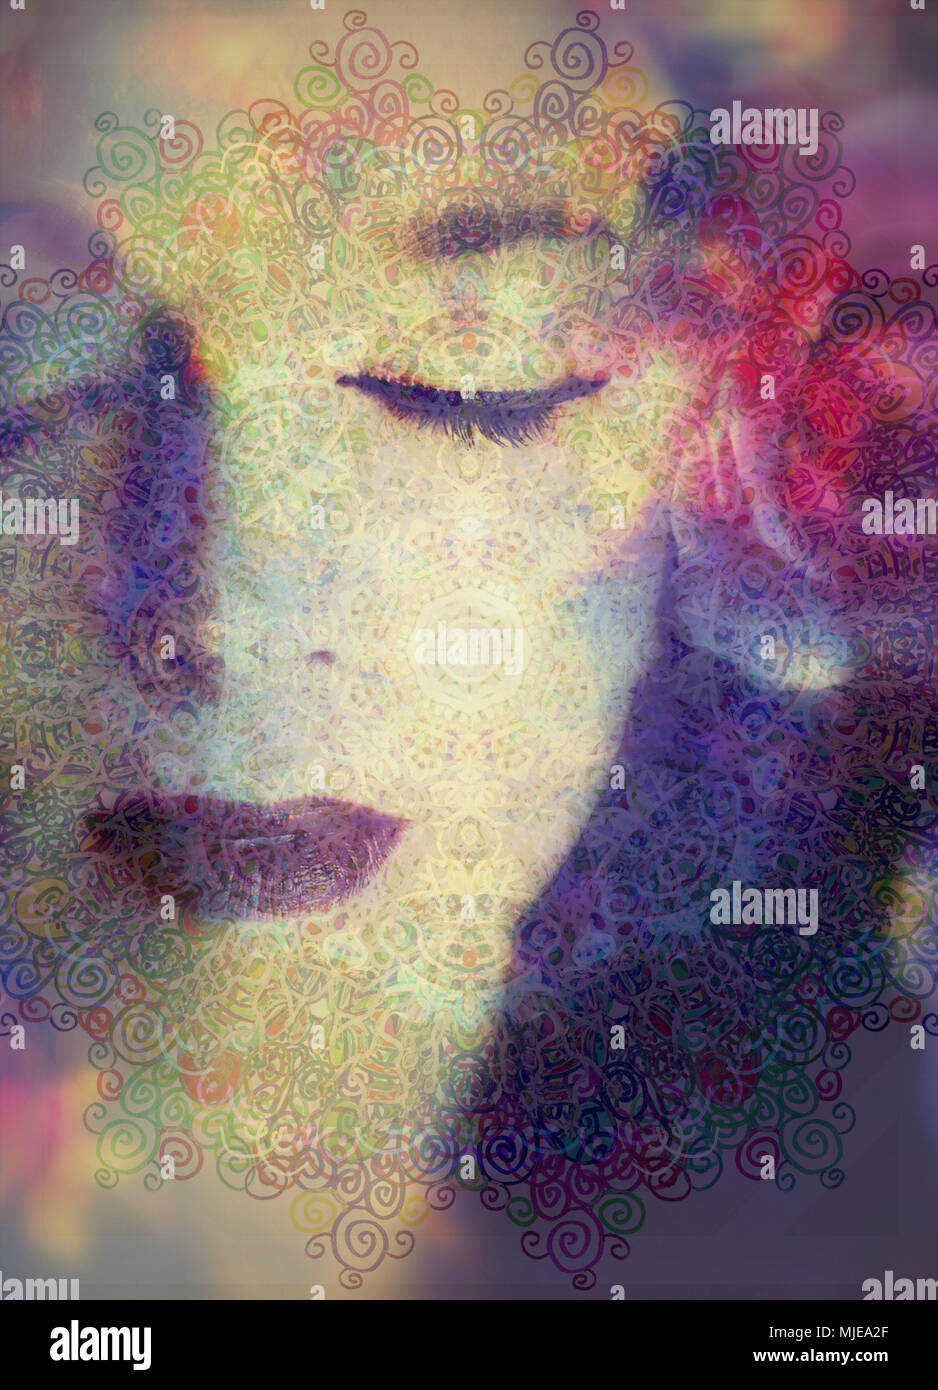 photomontage, woman, face, eyes closed, blossom, detail, Stock Photo